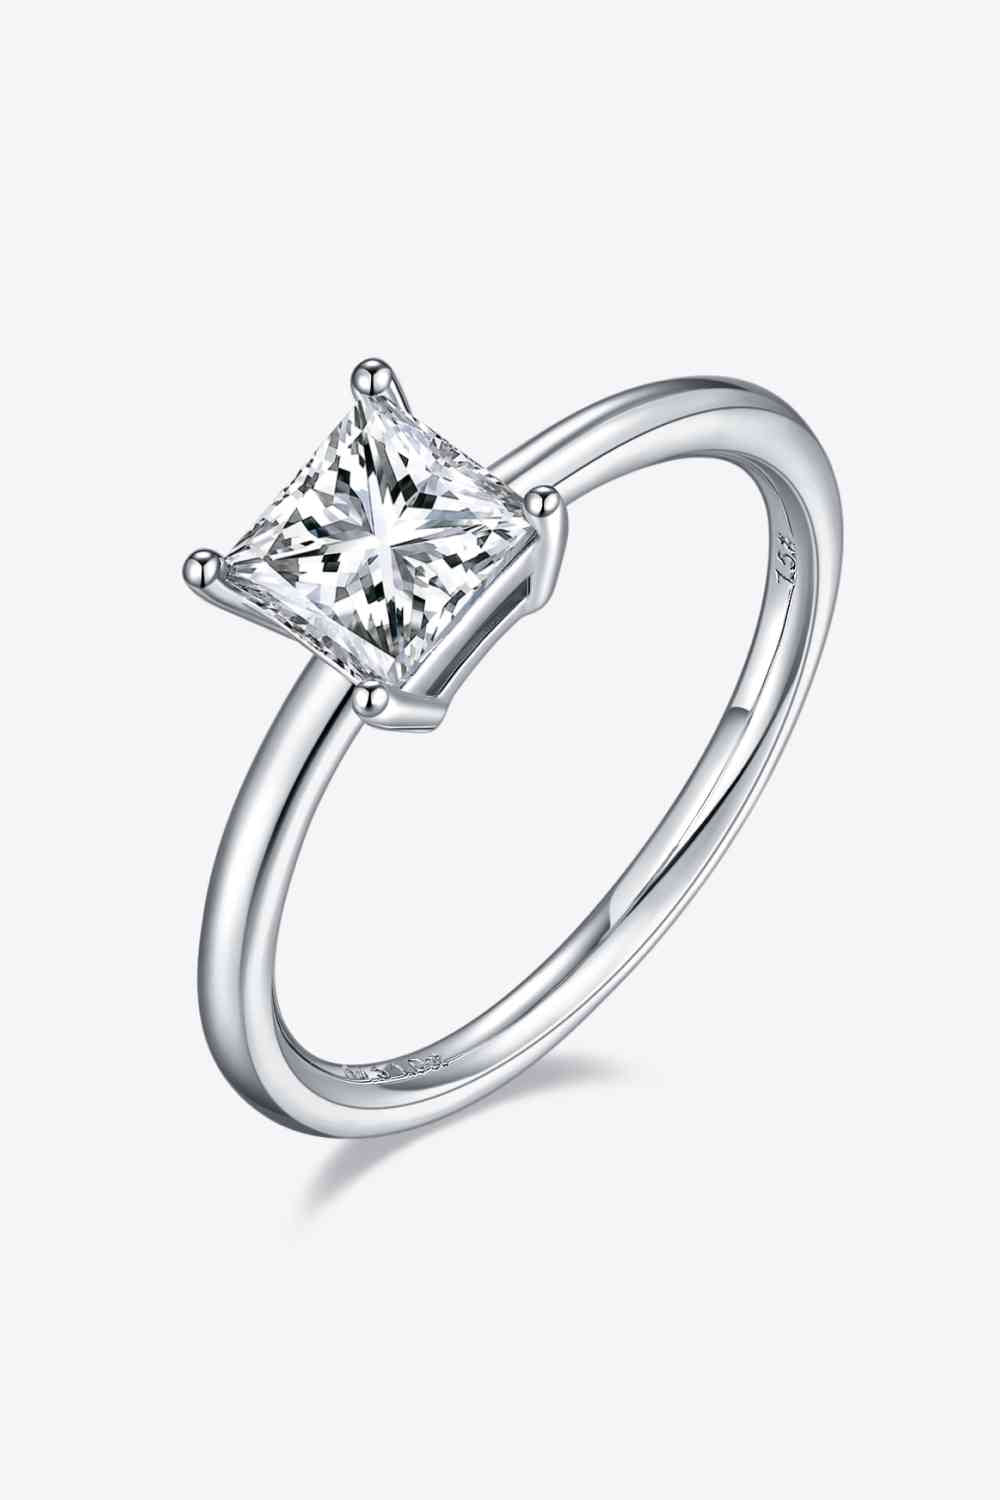 1 Carat Moissanite 925 Sterling Silver Solitaire Ring Square